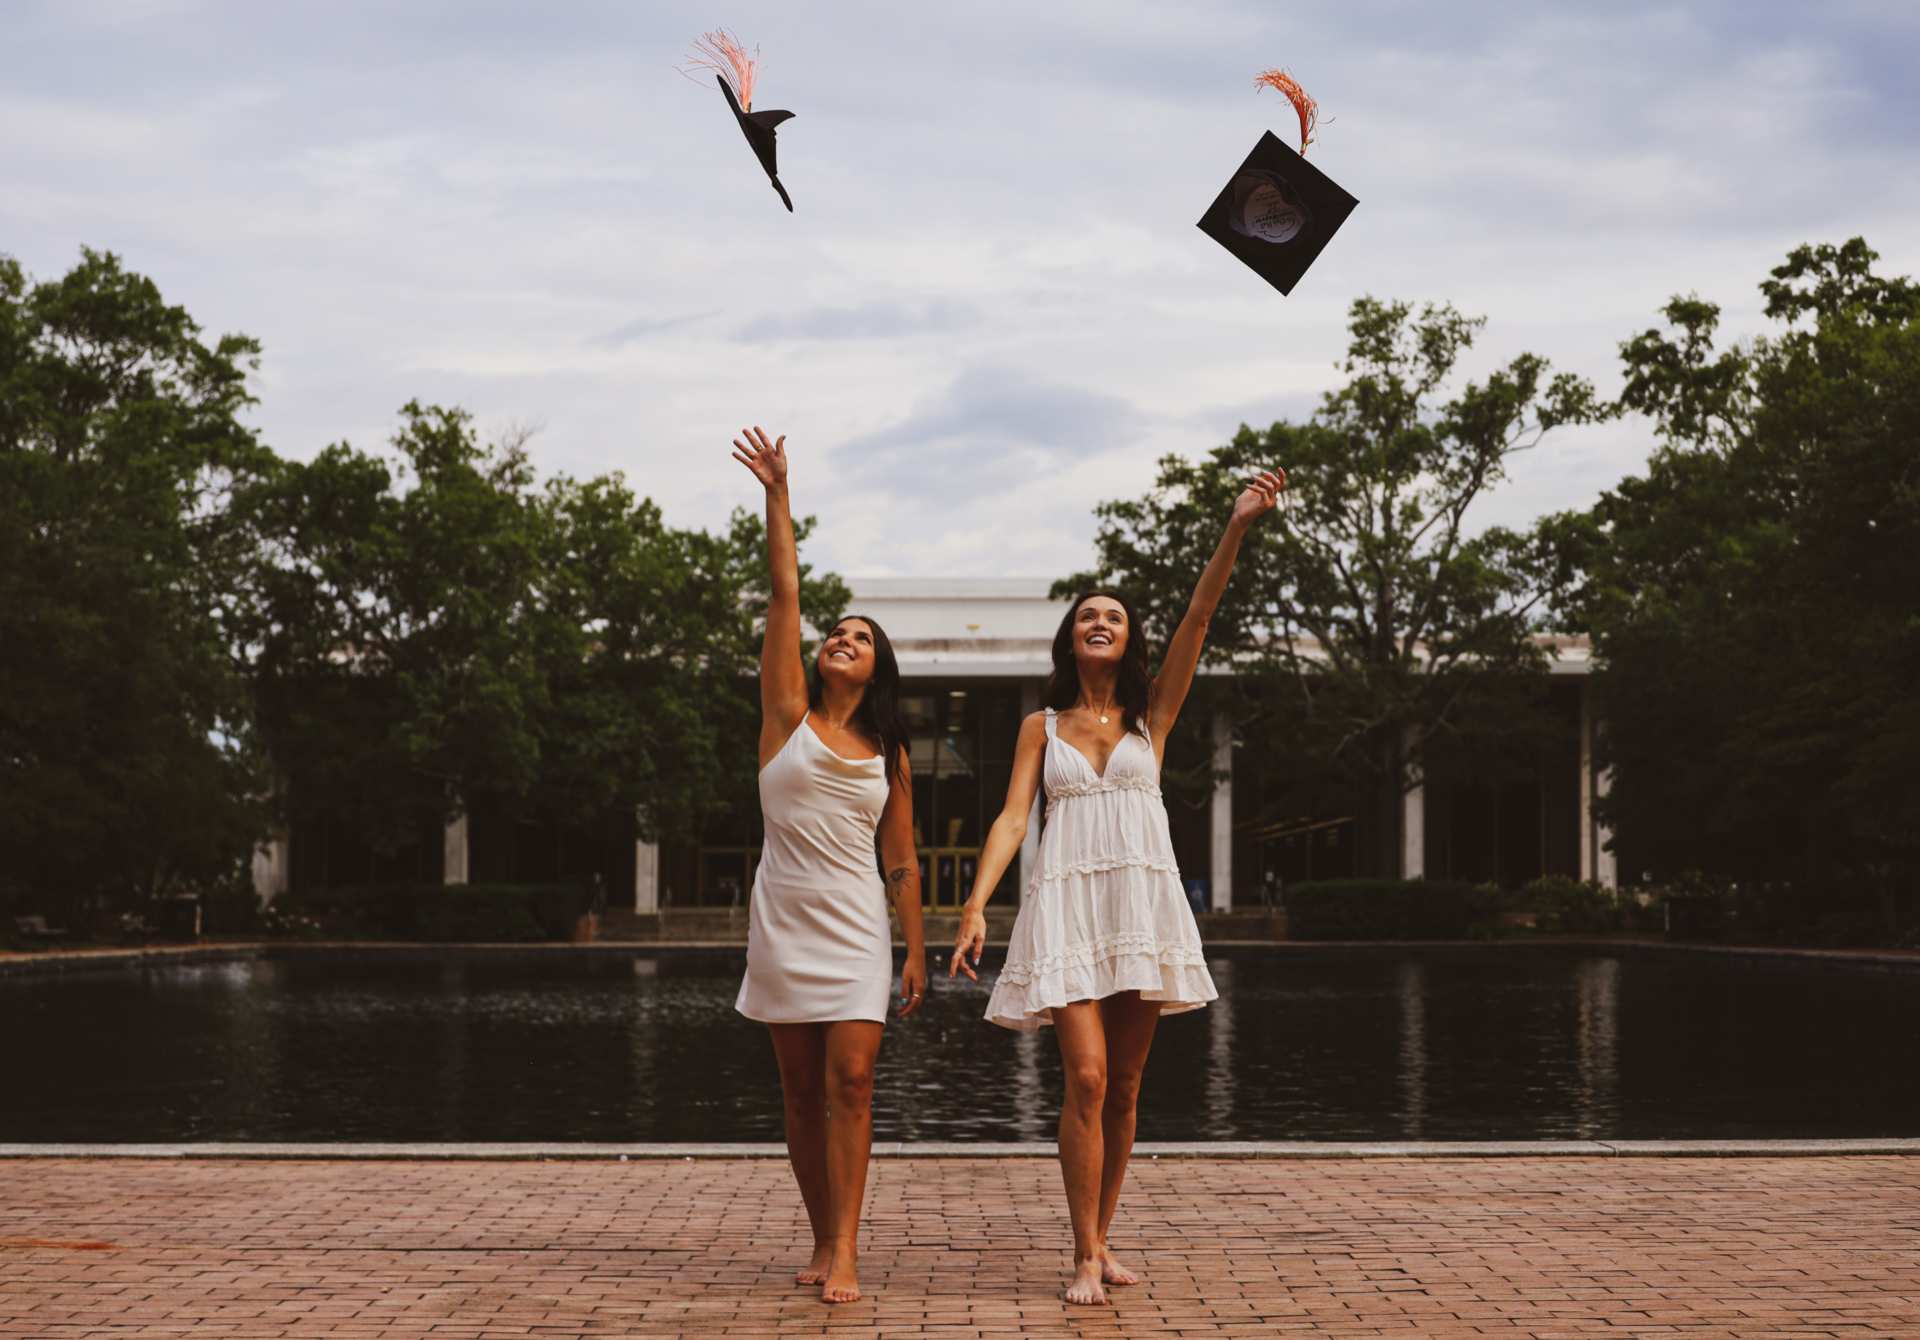 The Best Services for your Graduation Glow